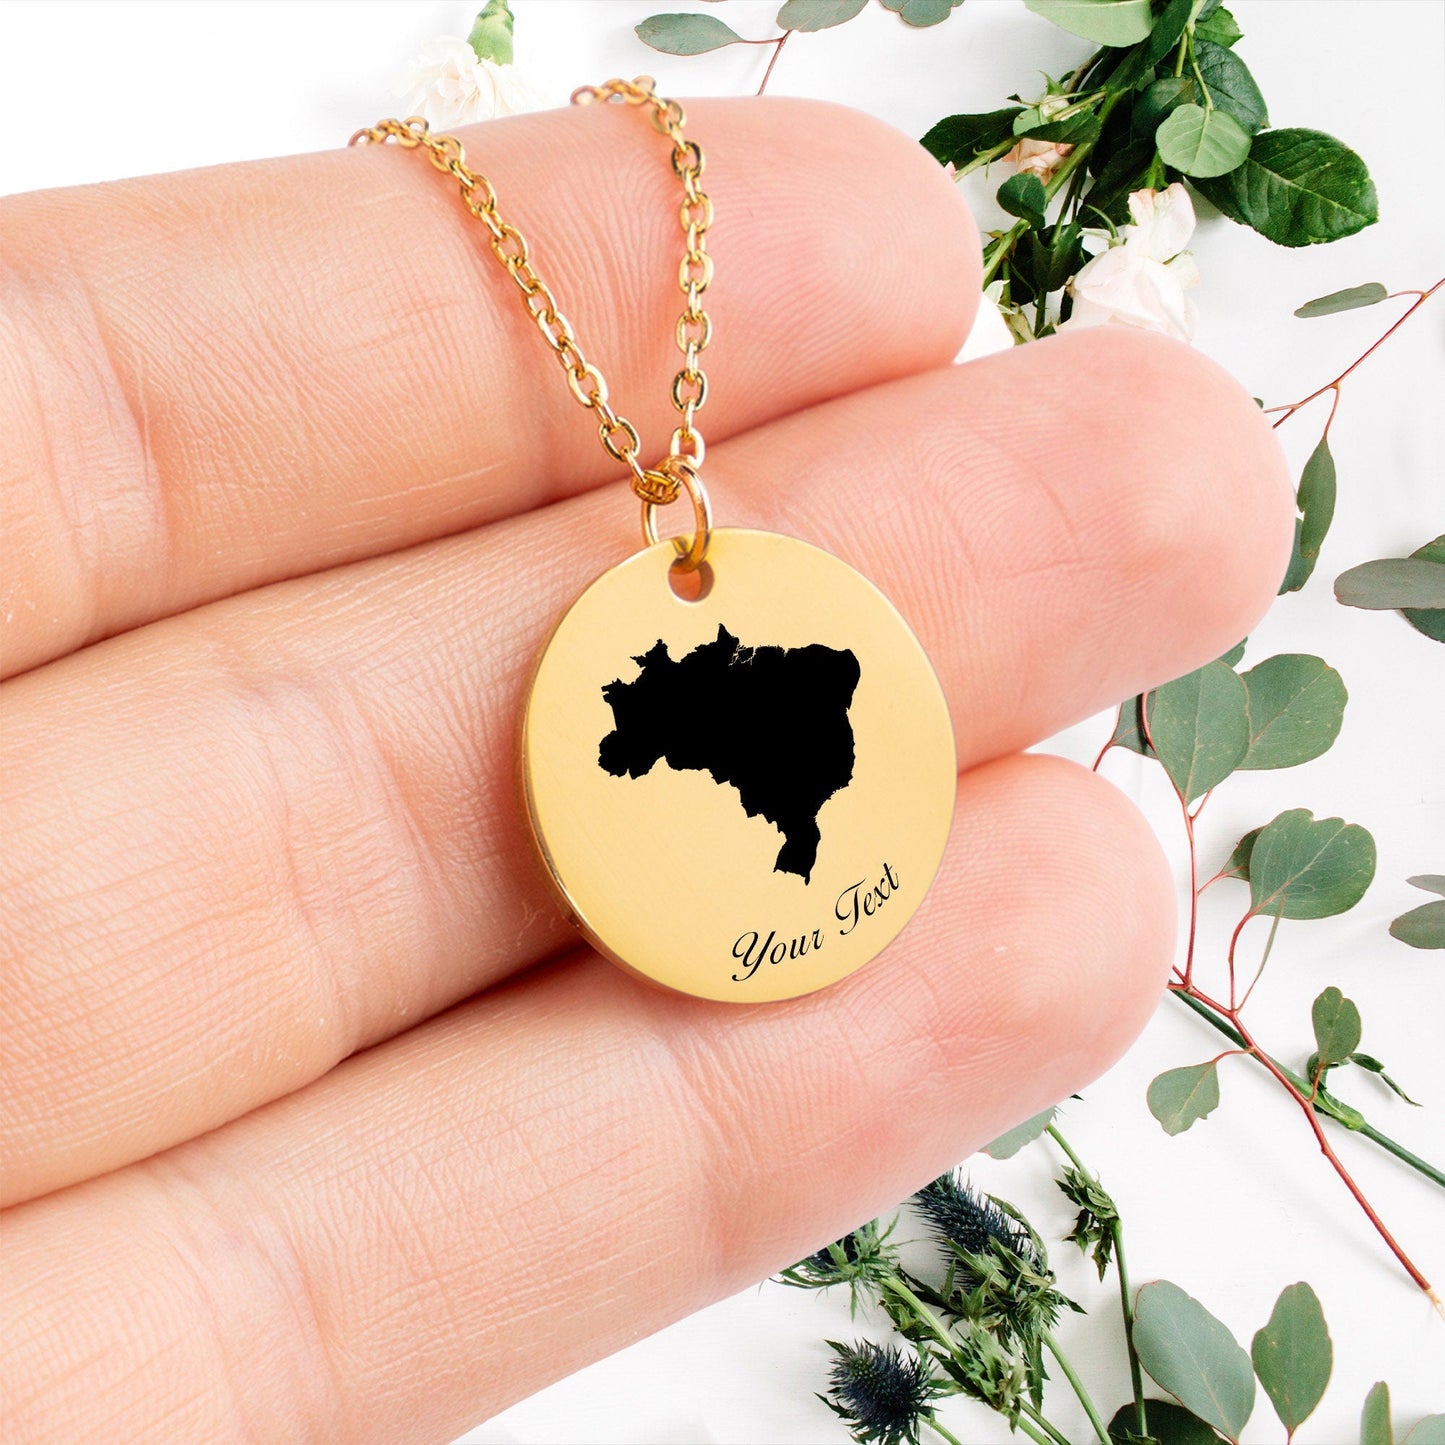 Brazil Country Map Necklace, Your Name Necklace, Minimalist Necklace, Personalized Gift, Silver Necklace, Gift For Him Her